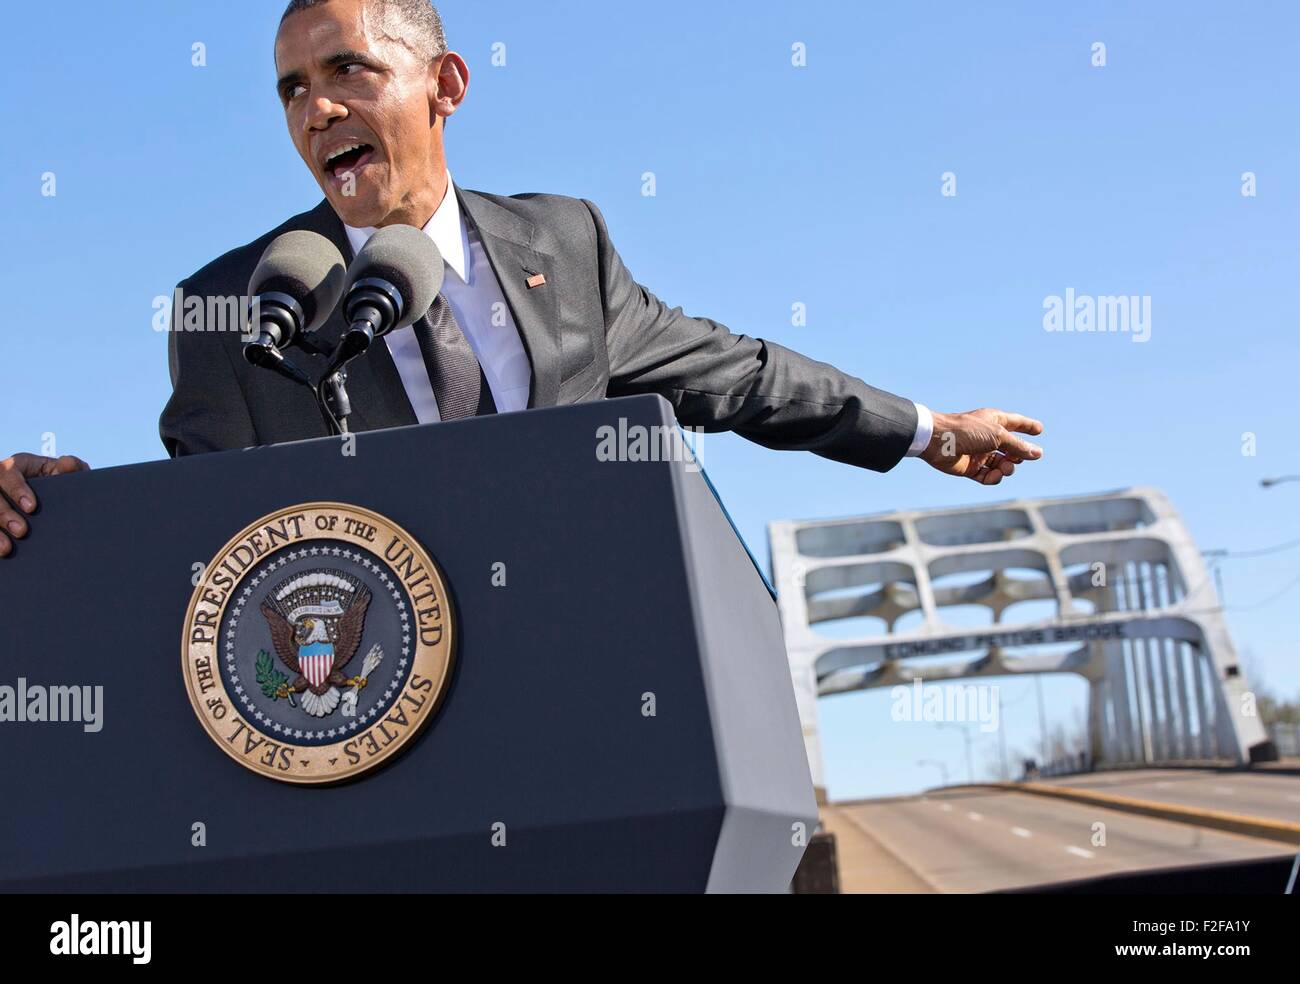 U.S. President Barack Obama toward the Edmund Pettus Bridge during his speech marking the 50th Anniversary of the Selma to Montgomery civil rights marches March 7, 2015 in Selma, Alabama. Stock Photo